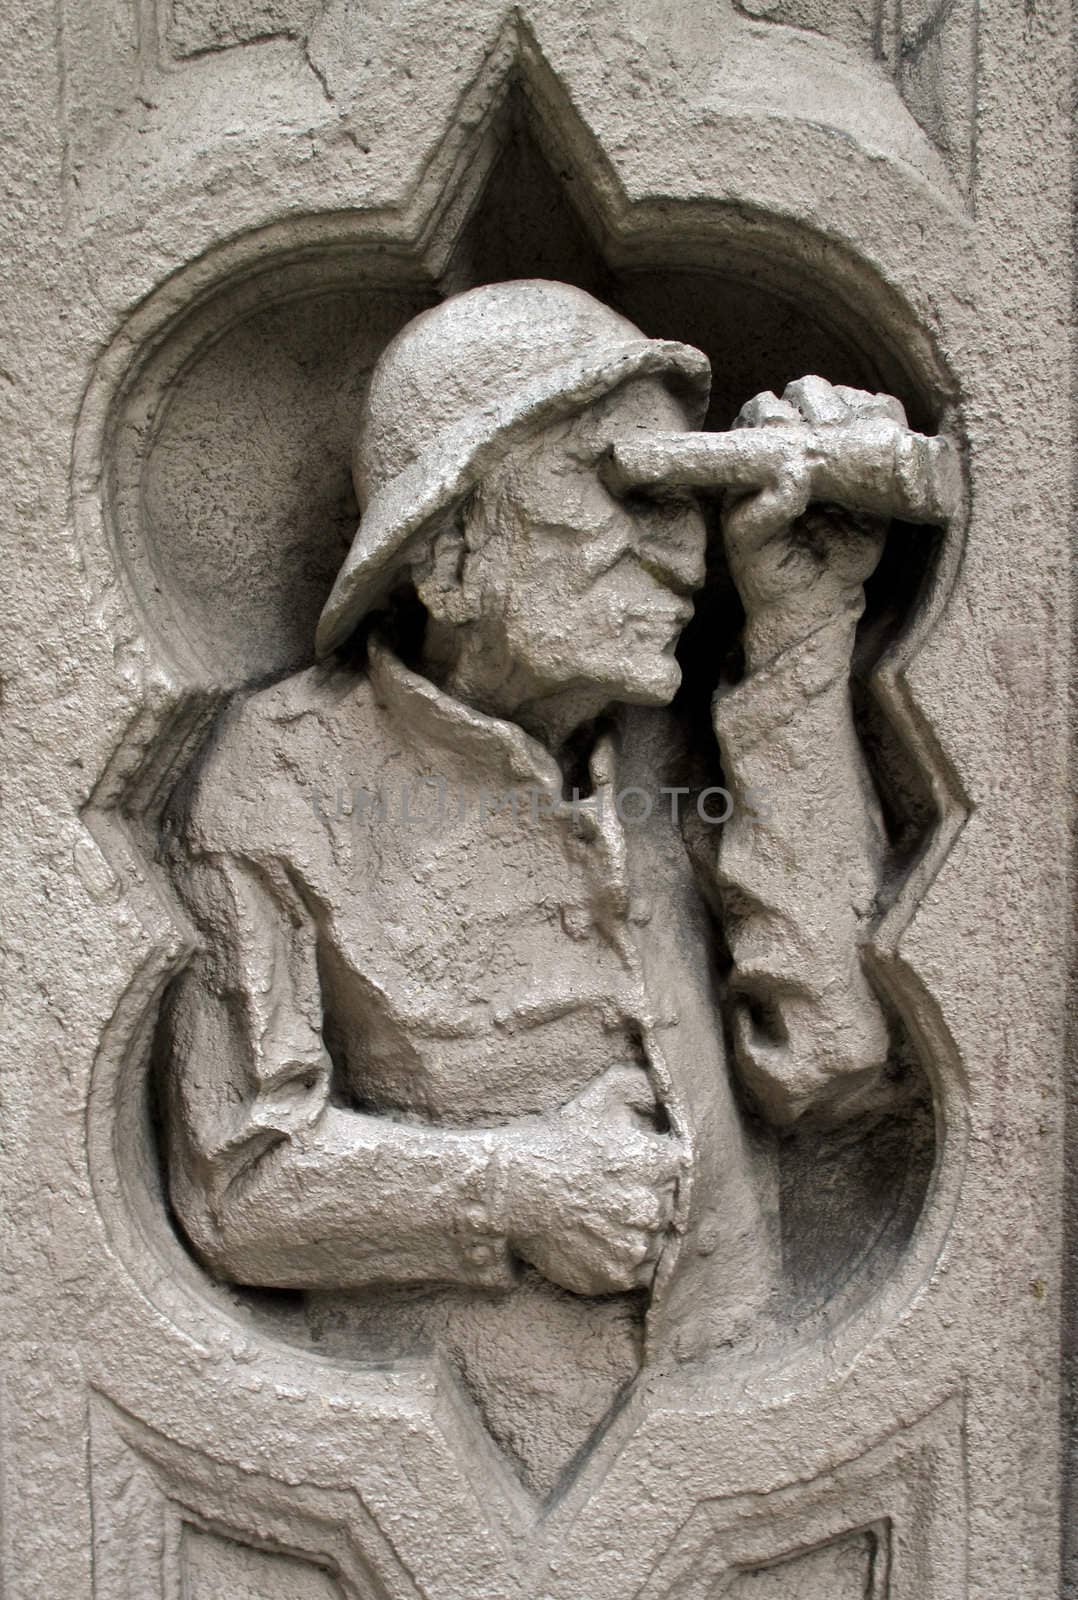 Carving of an old man looking through binoculars on the outside of a building